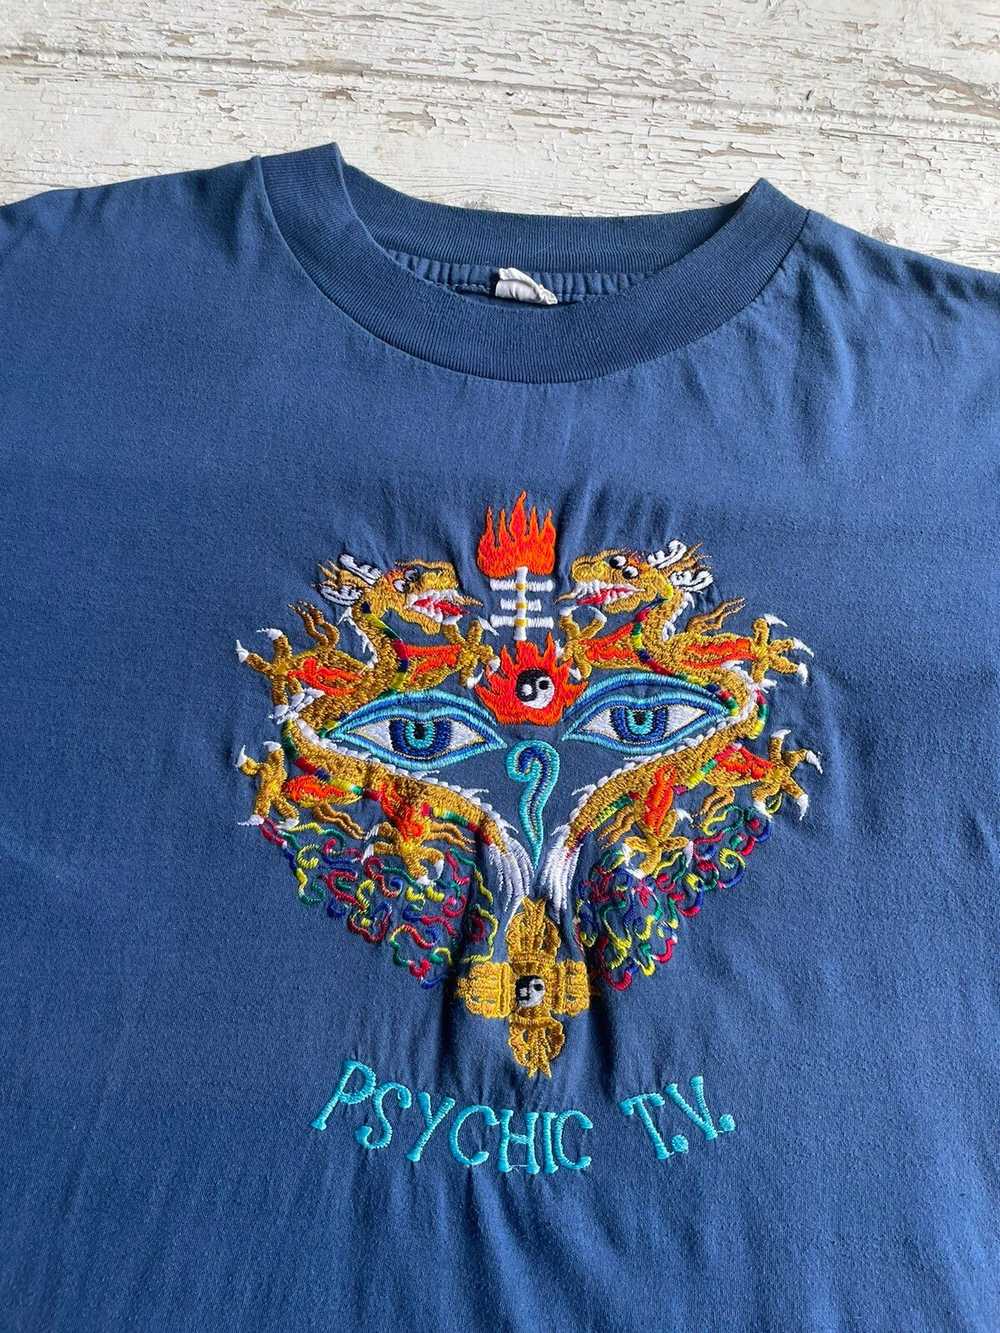 Band Tees × Vintage 80’s Psychic TV Indian Embroi… - image 2